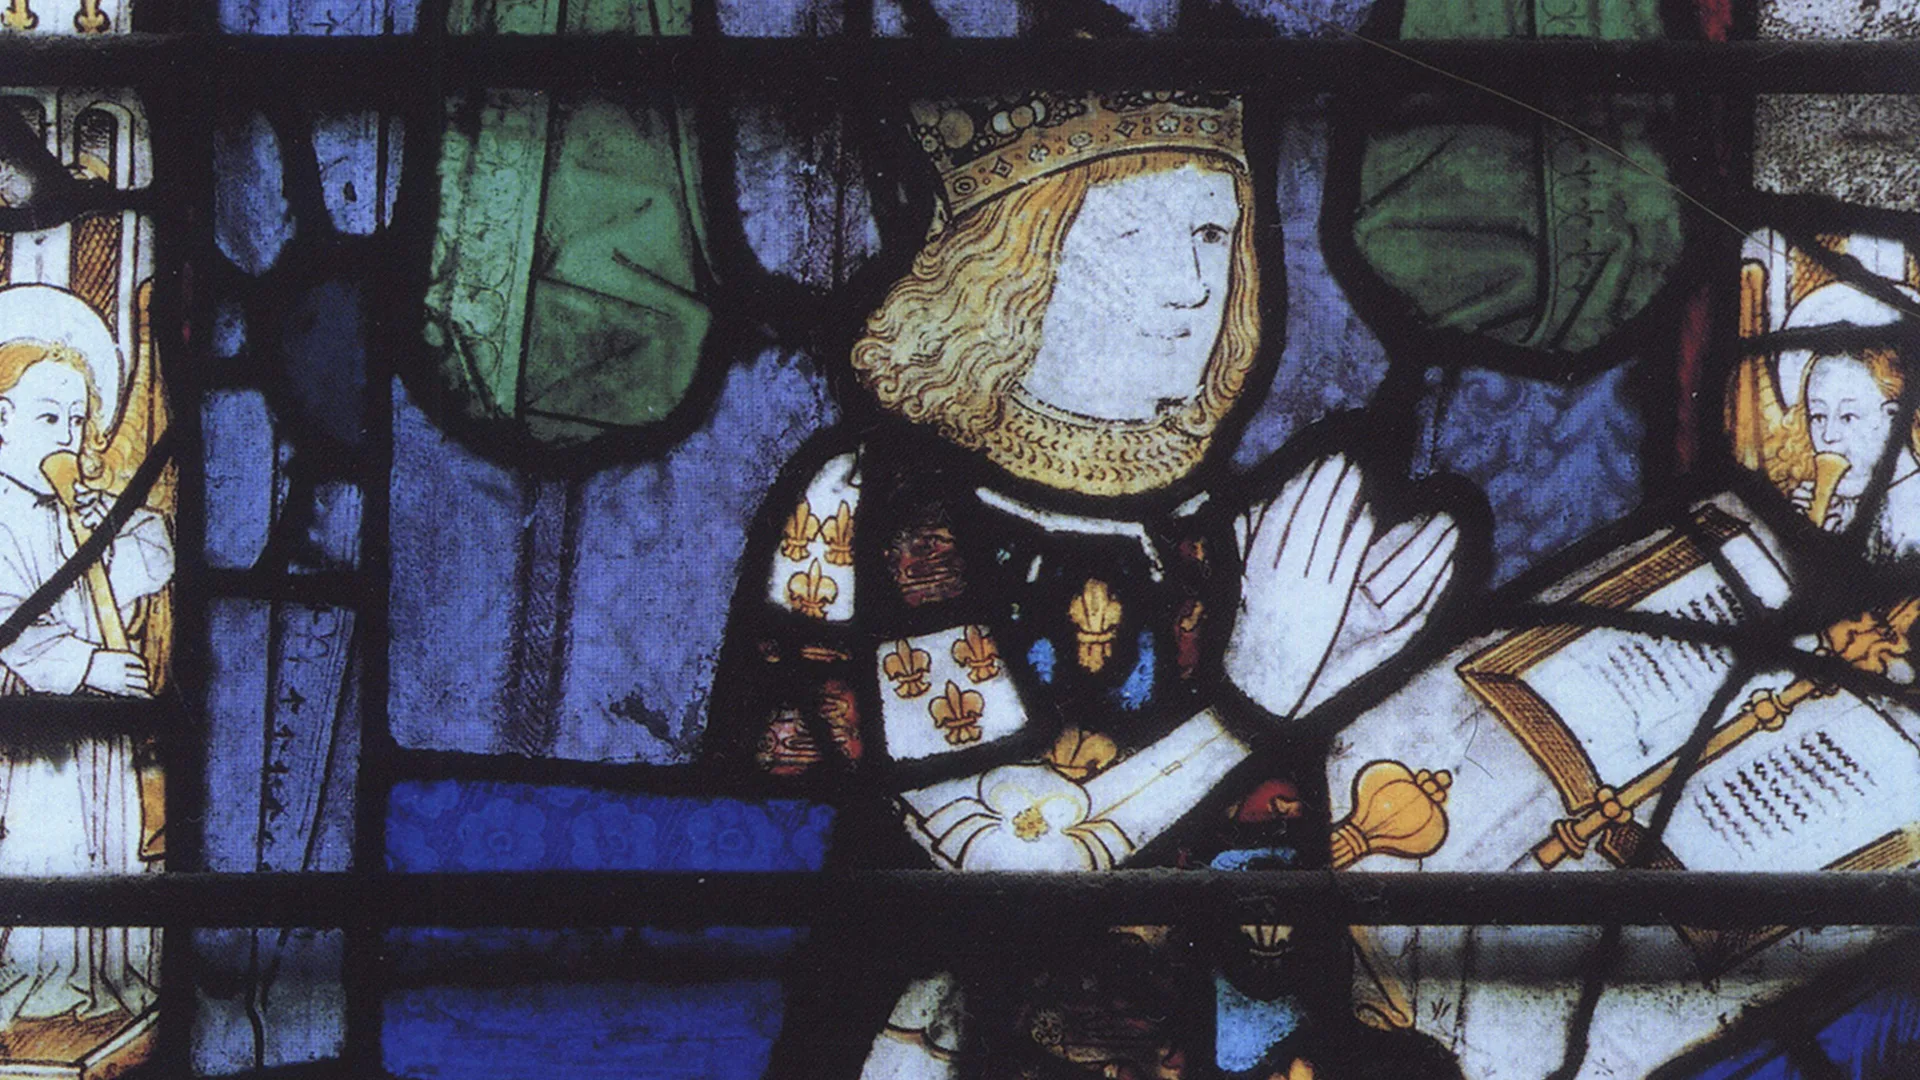 Prince Arthur Tudor in stained glass